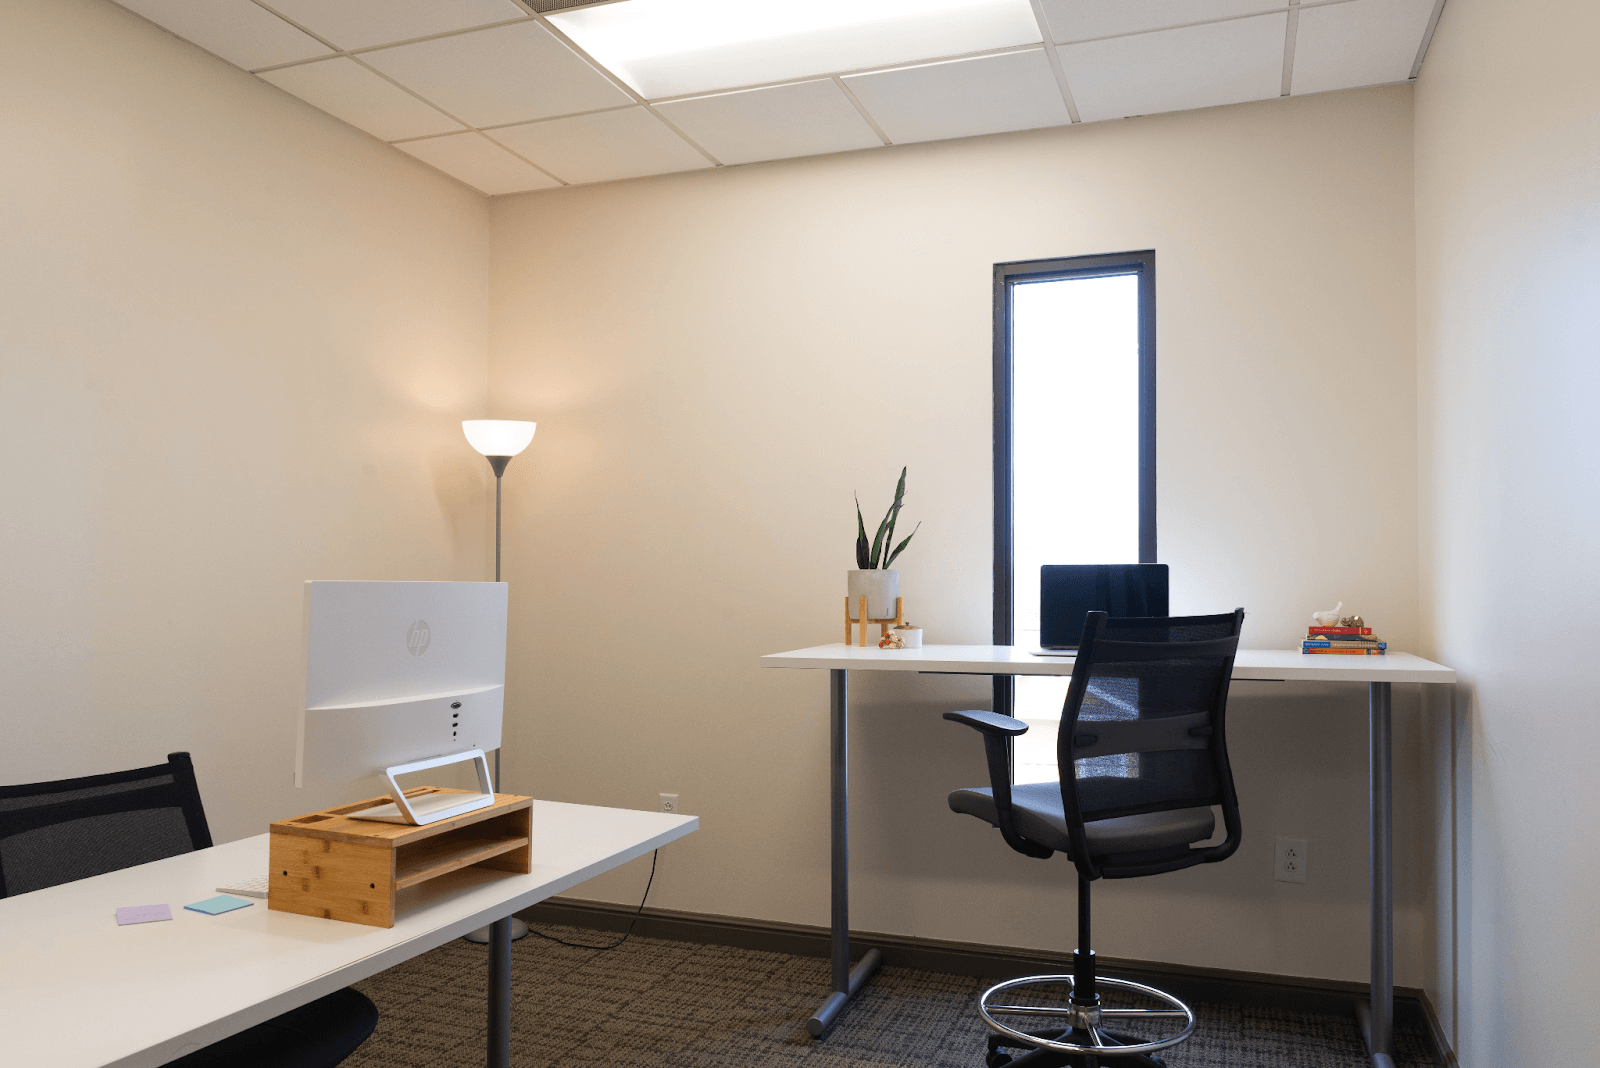 rent office space near me